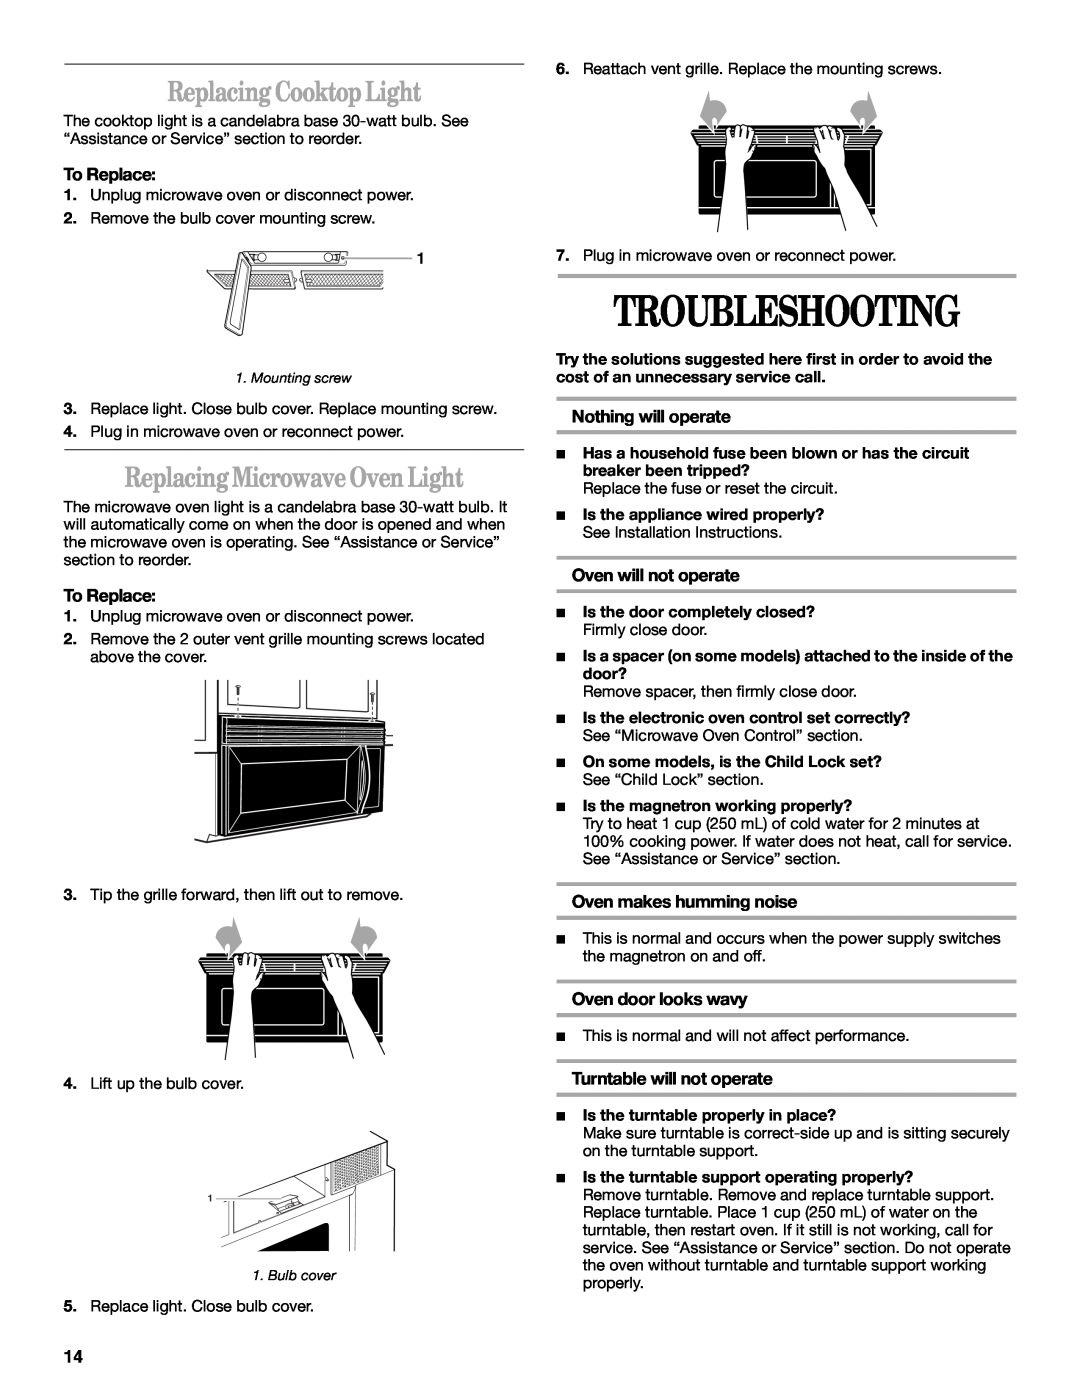 Whirlpool MH8150XM manual Troubleshooting, Replacing Cooktop Light, Replacing Microwave Oven Light 